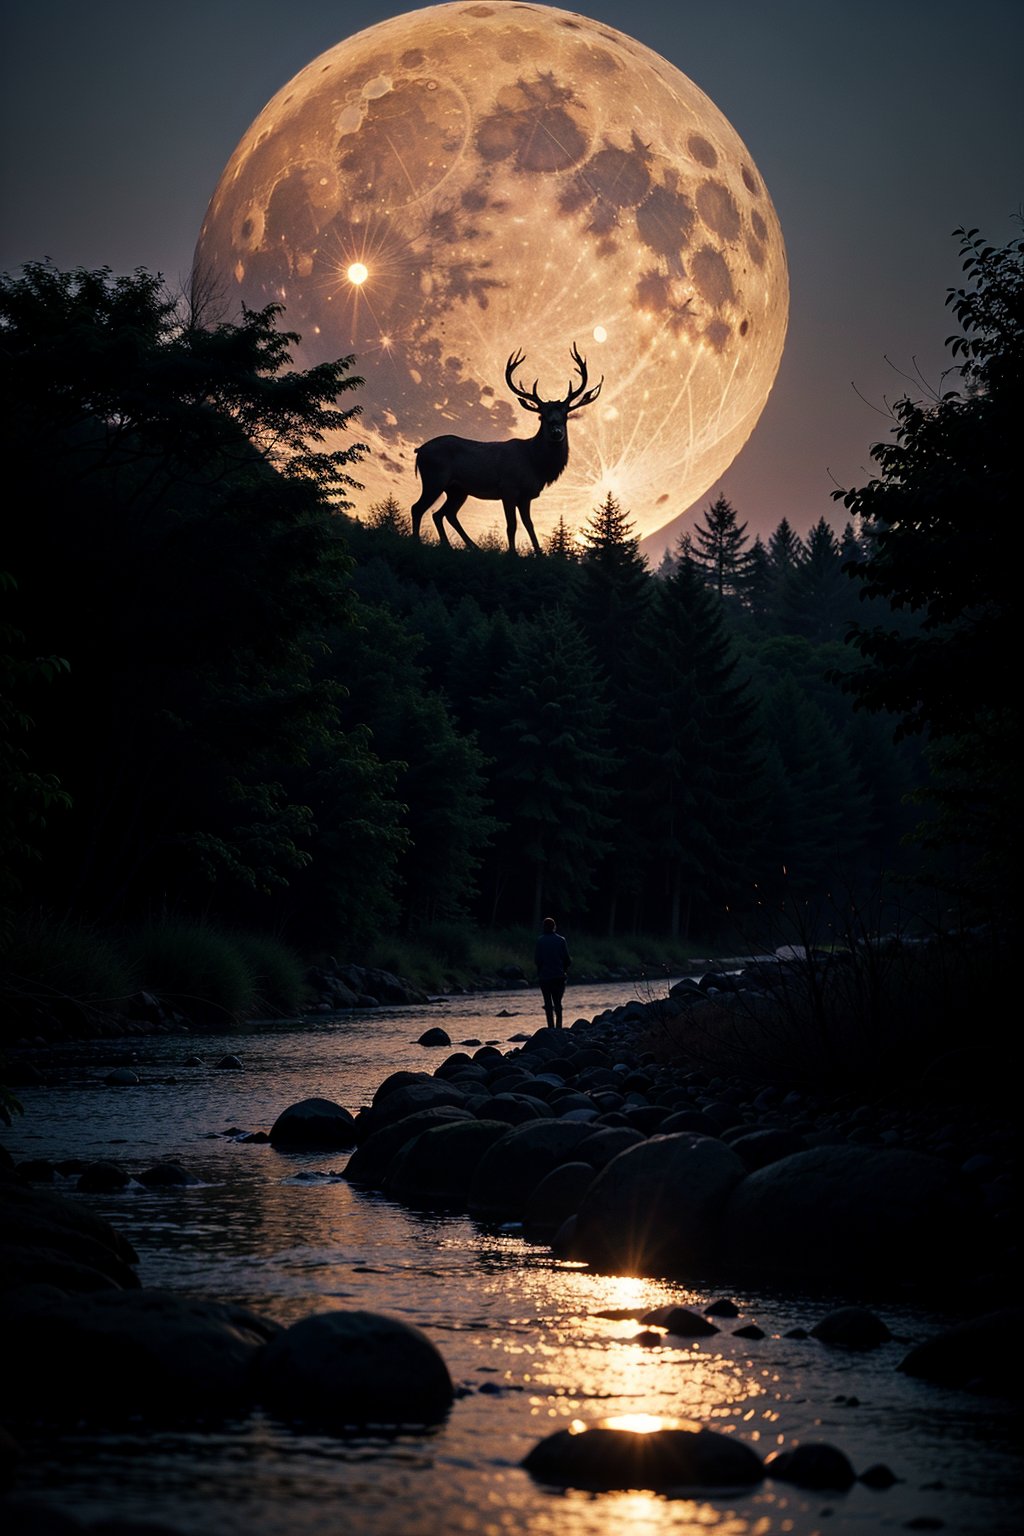 8k, silhouette photo of a stag, in midst of a jungle, near river bank, cool blue light, full moon, night scene, bat flying, ,photorealistic